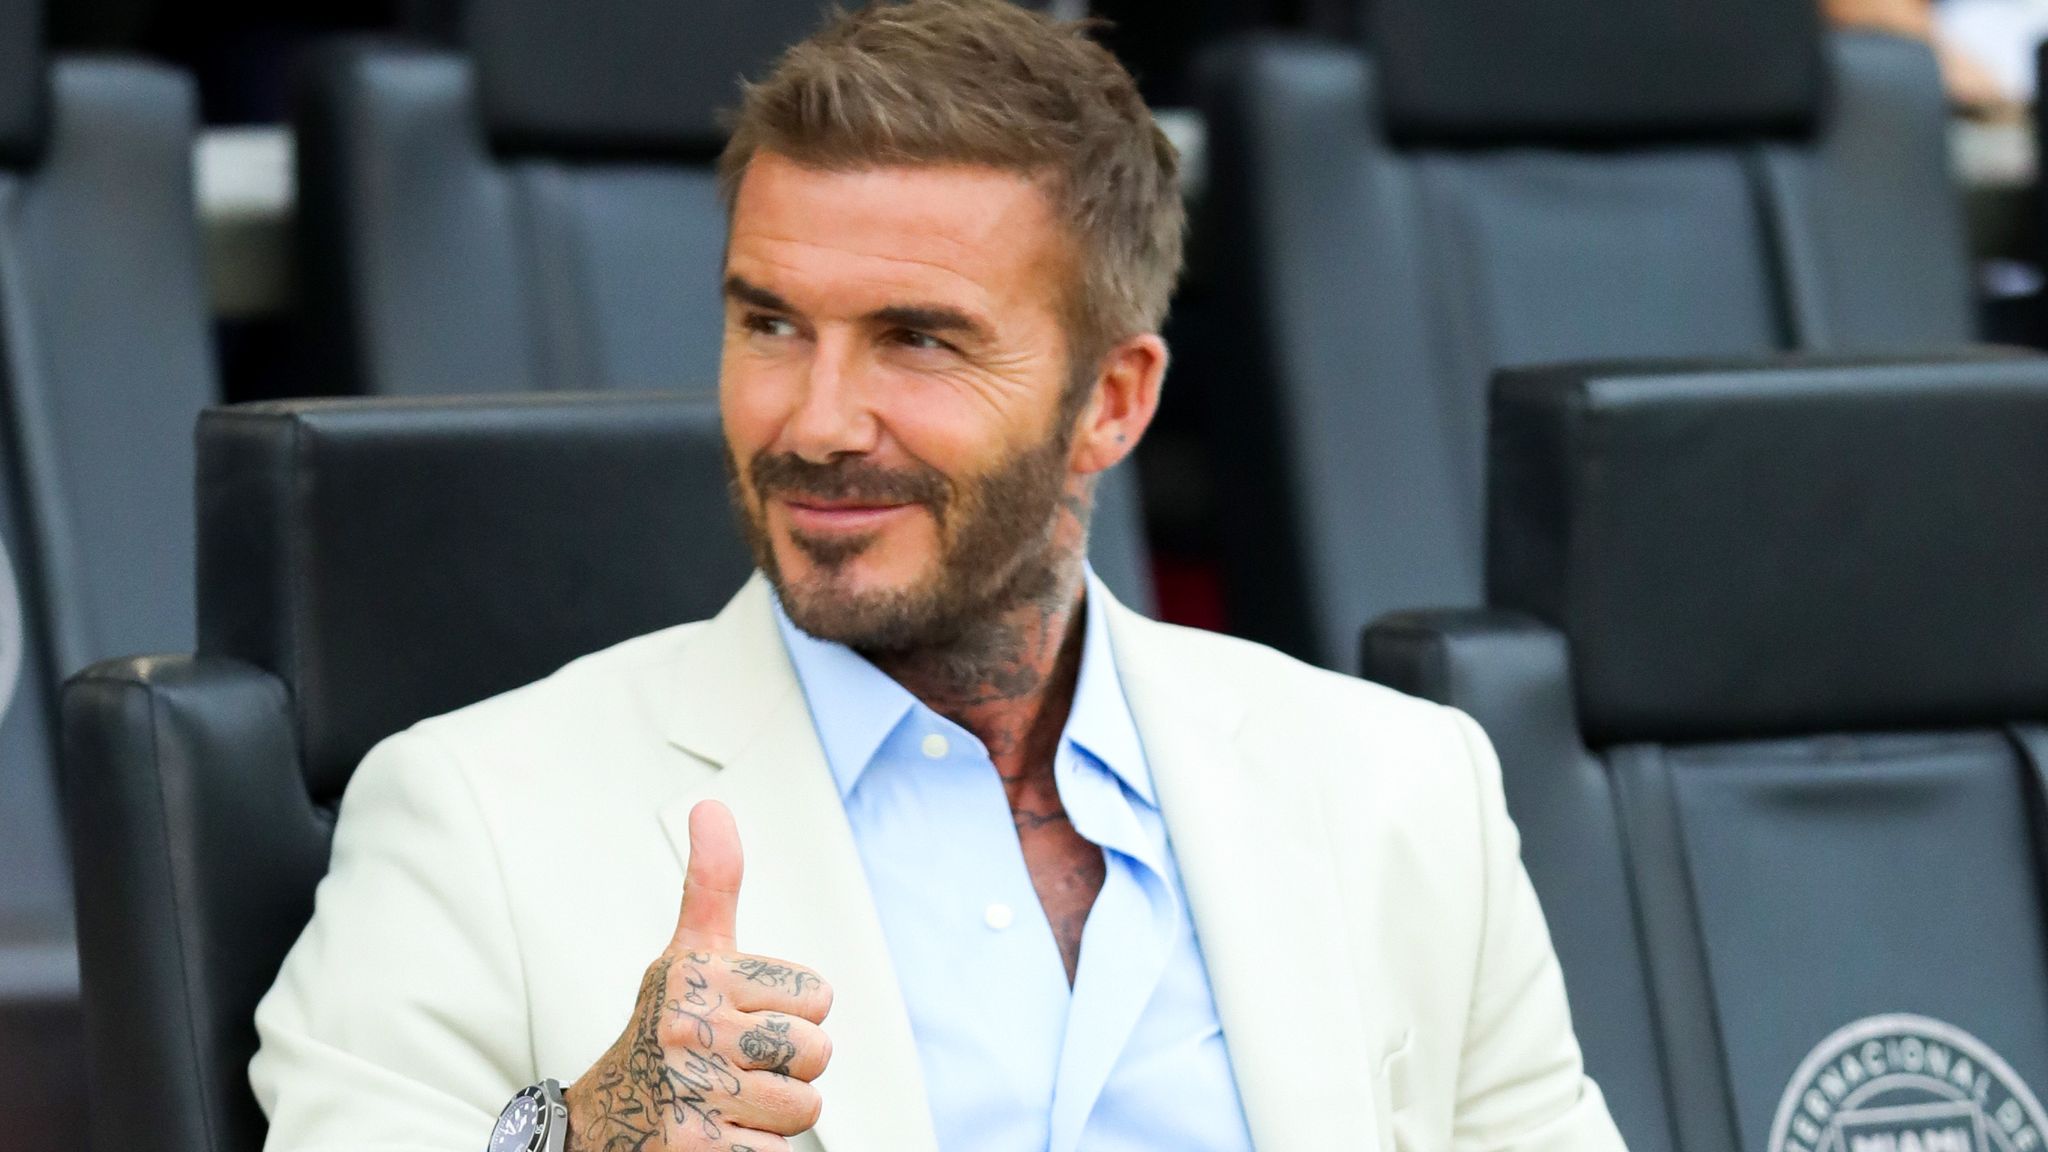 David Beckham open to Manchester United involvement but says